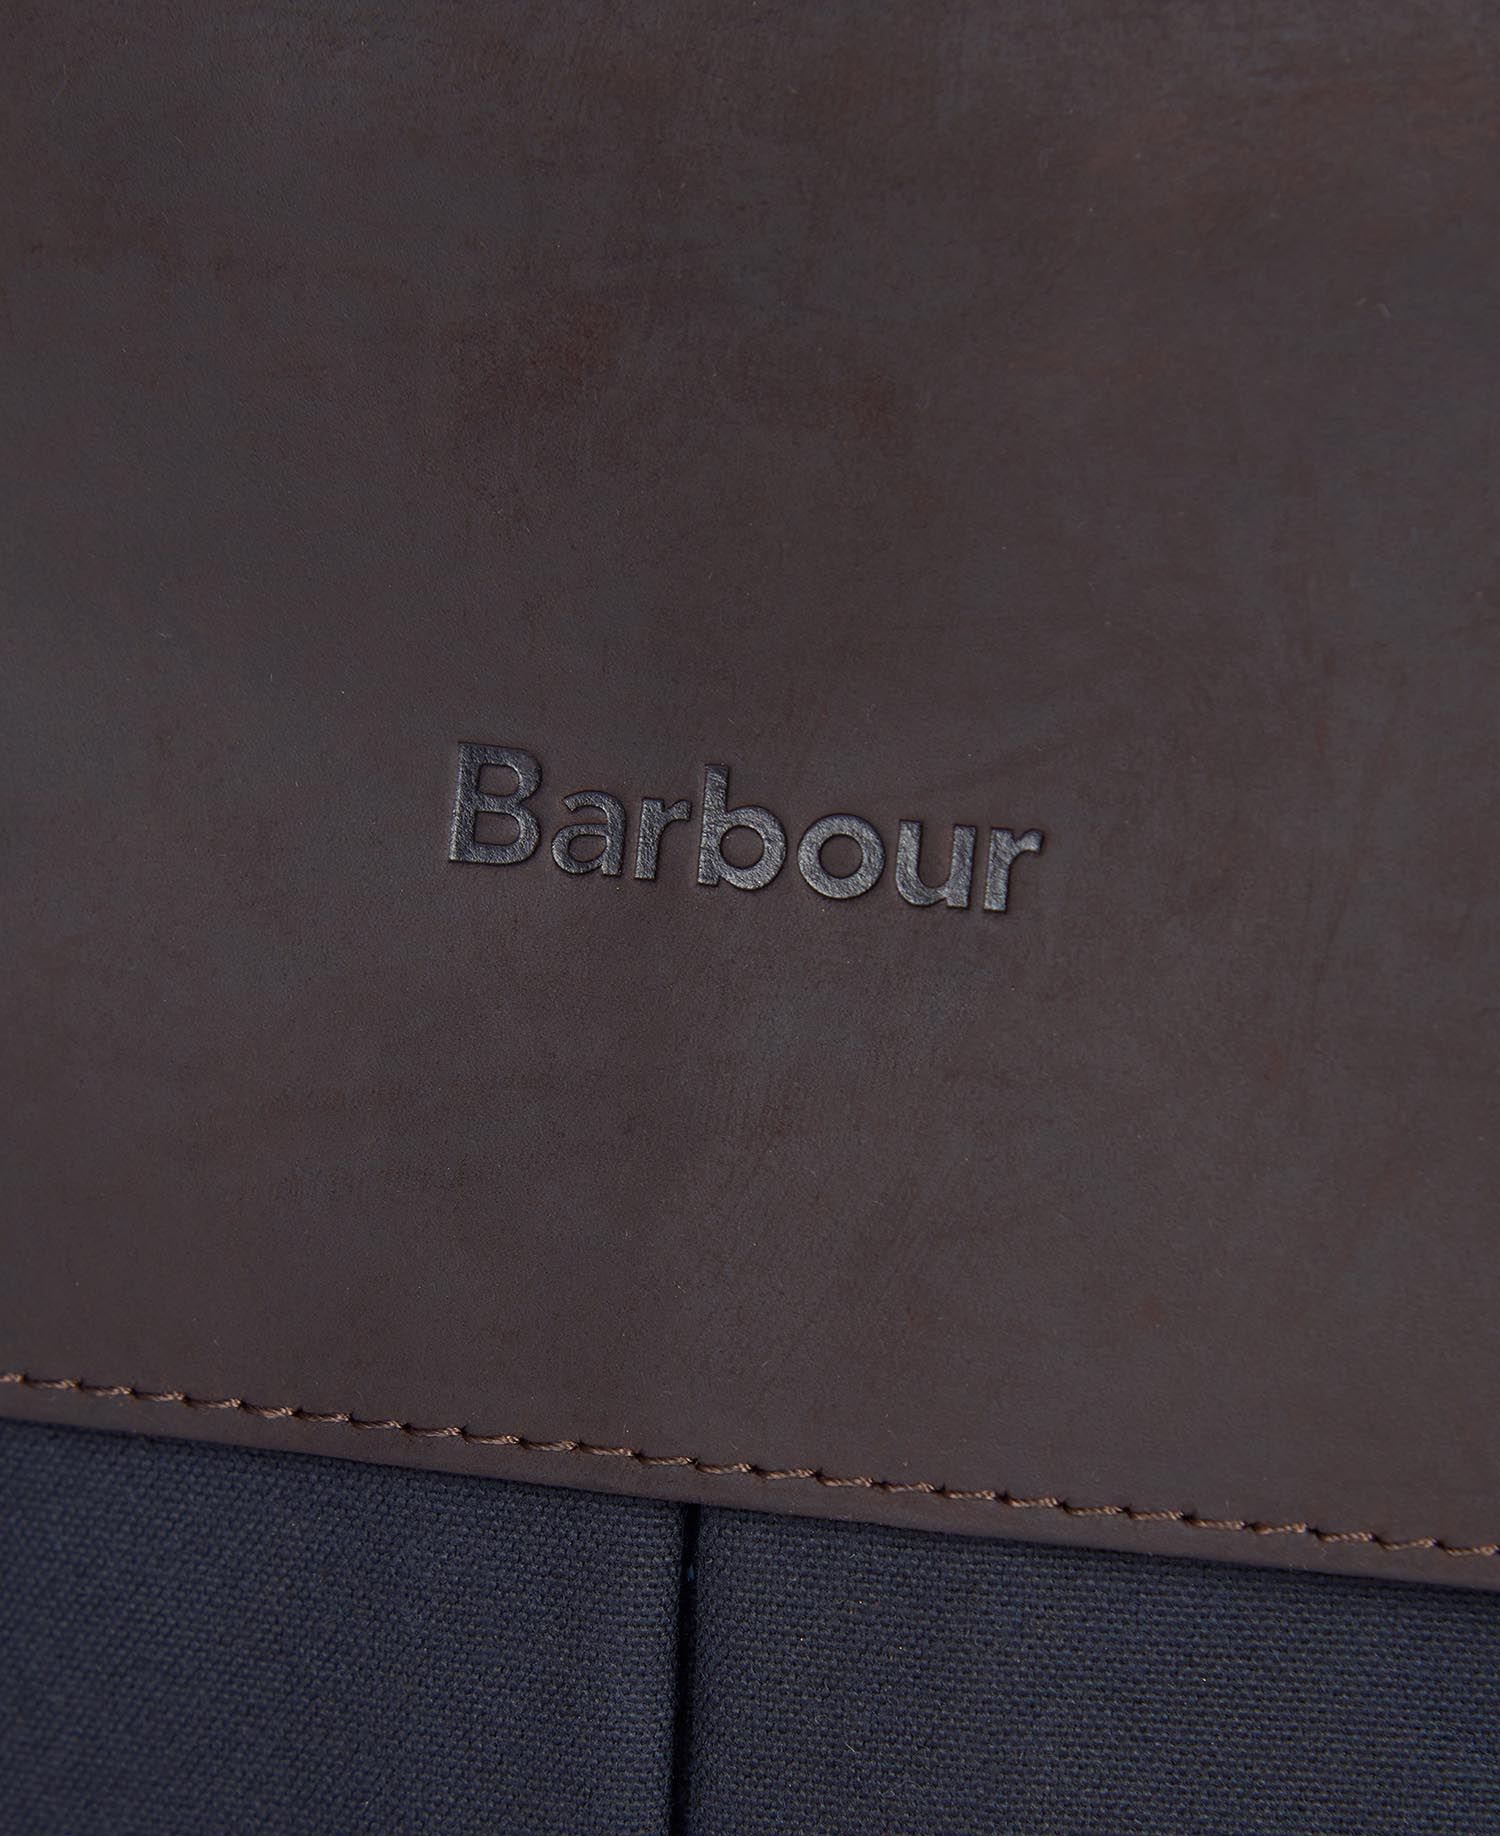 Barbour Wax Leather Briefcase in Navy | Barbour